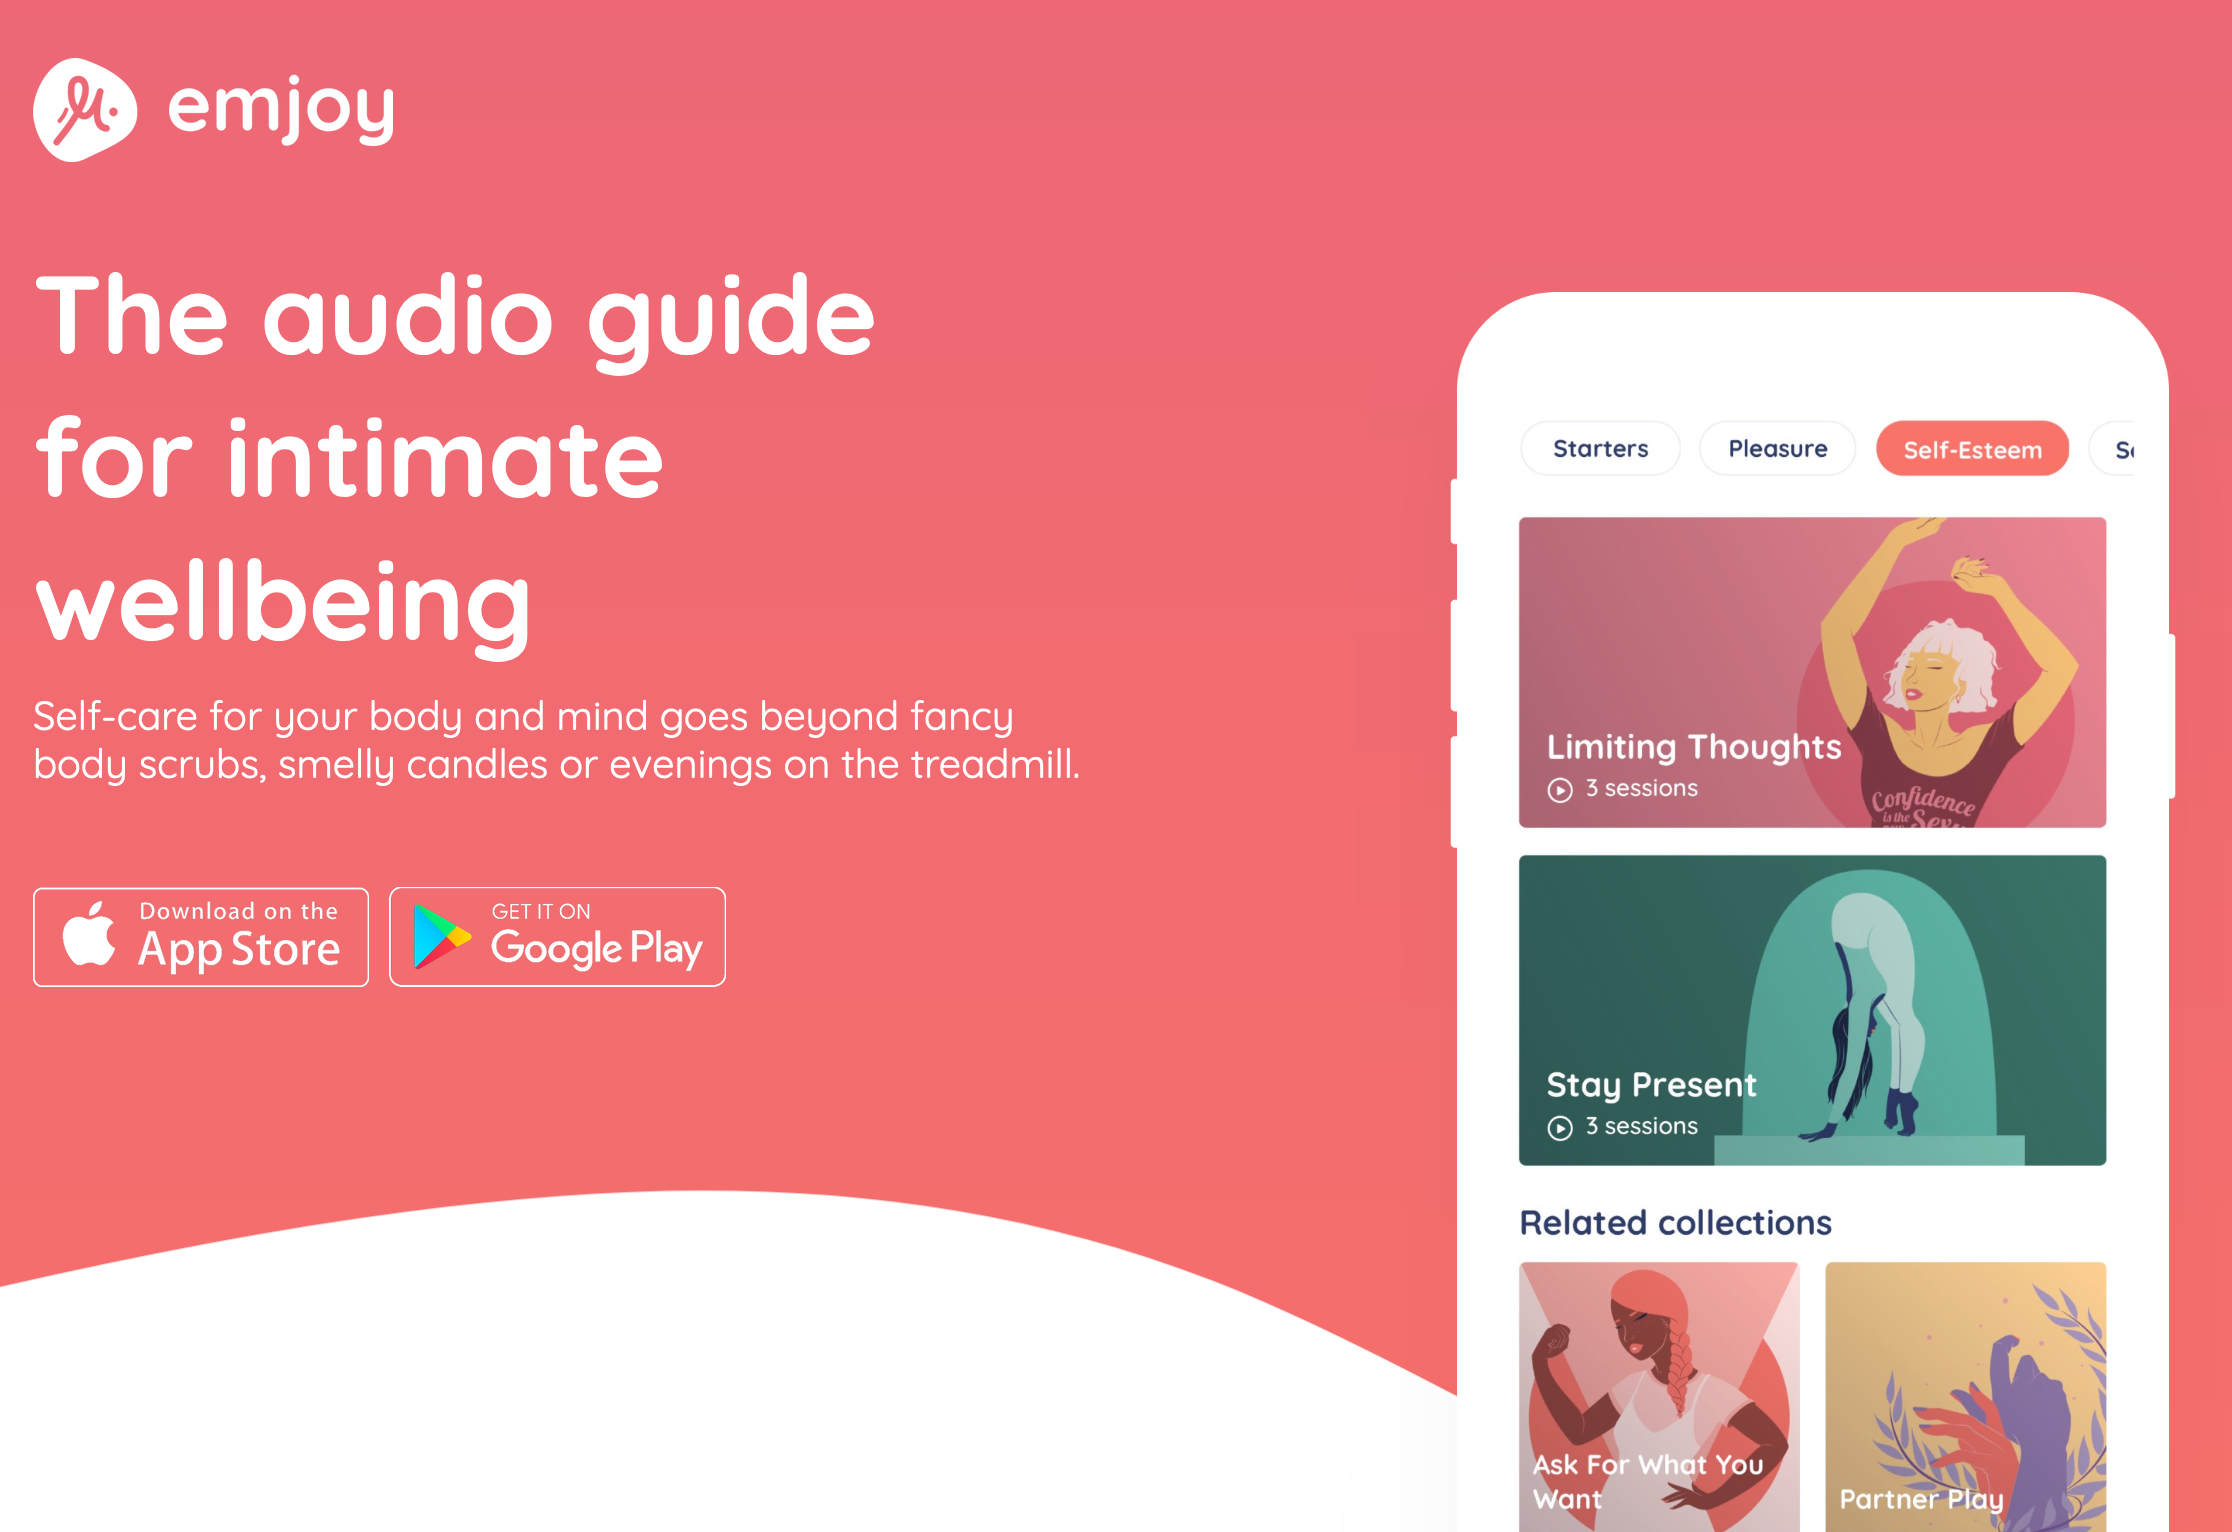 Emjoy - The audio guide for intimate wellbeing